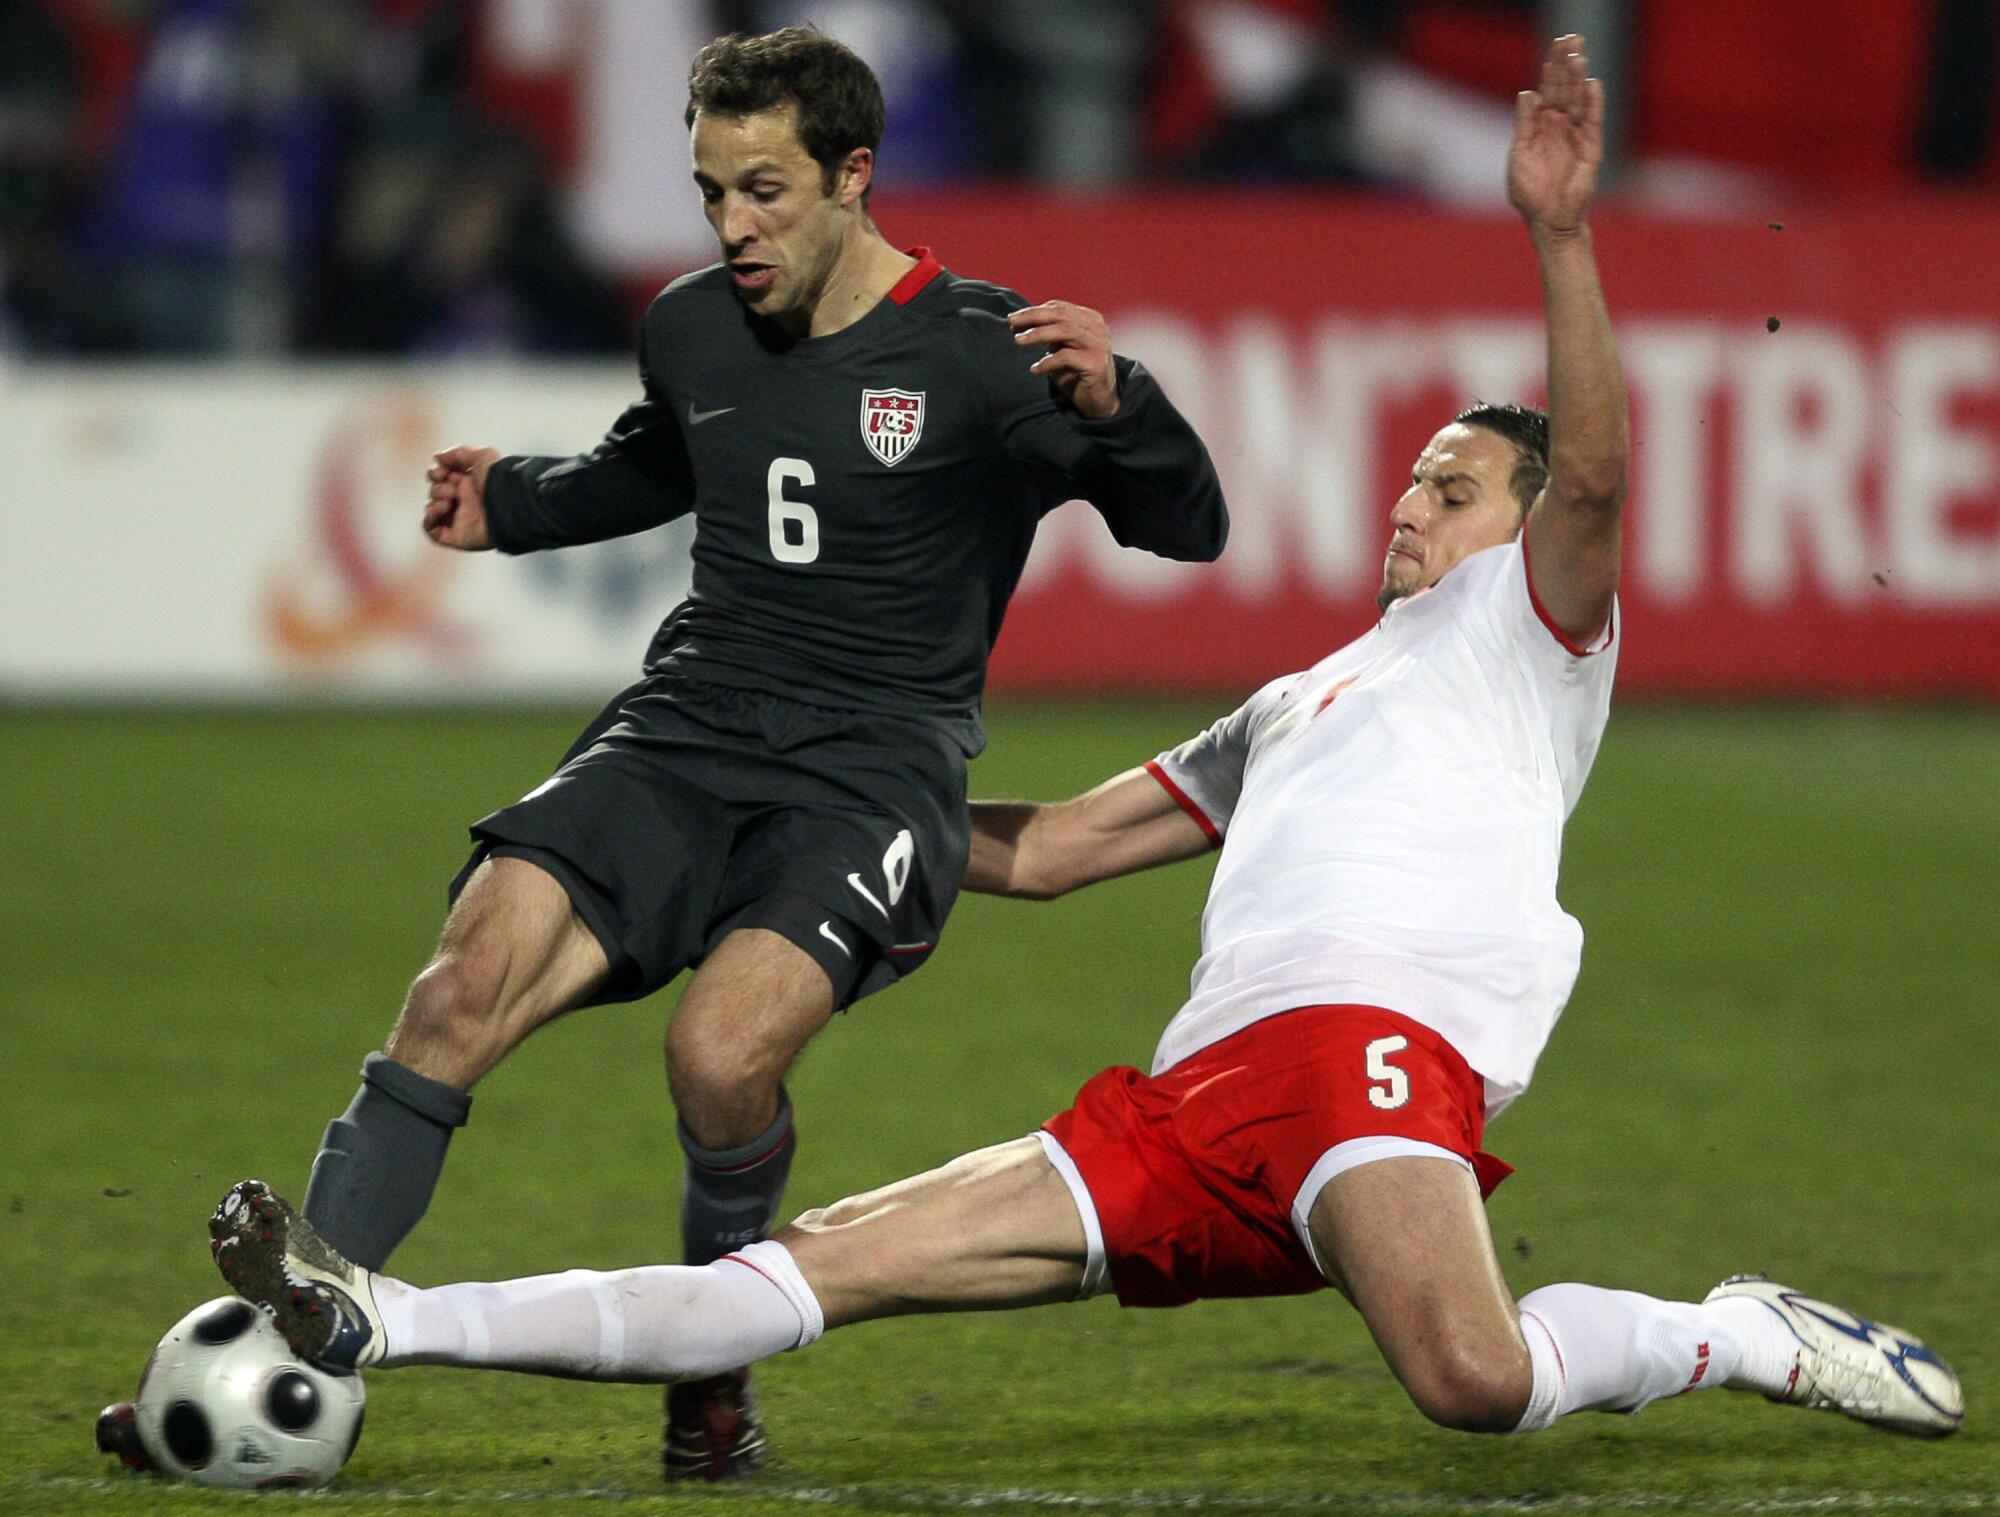 Steve Cherundolo and Dariusz Dudka challenge for the ball during a 2008 match between Poland and the U.S. 